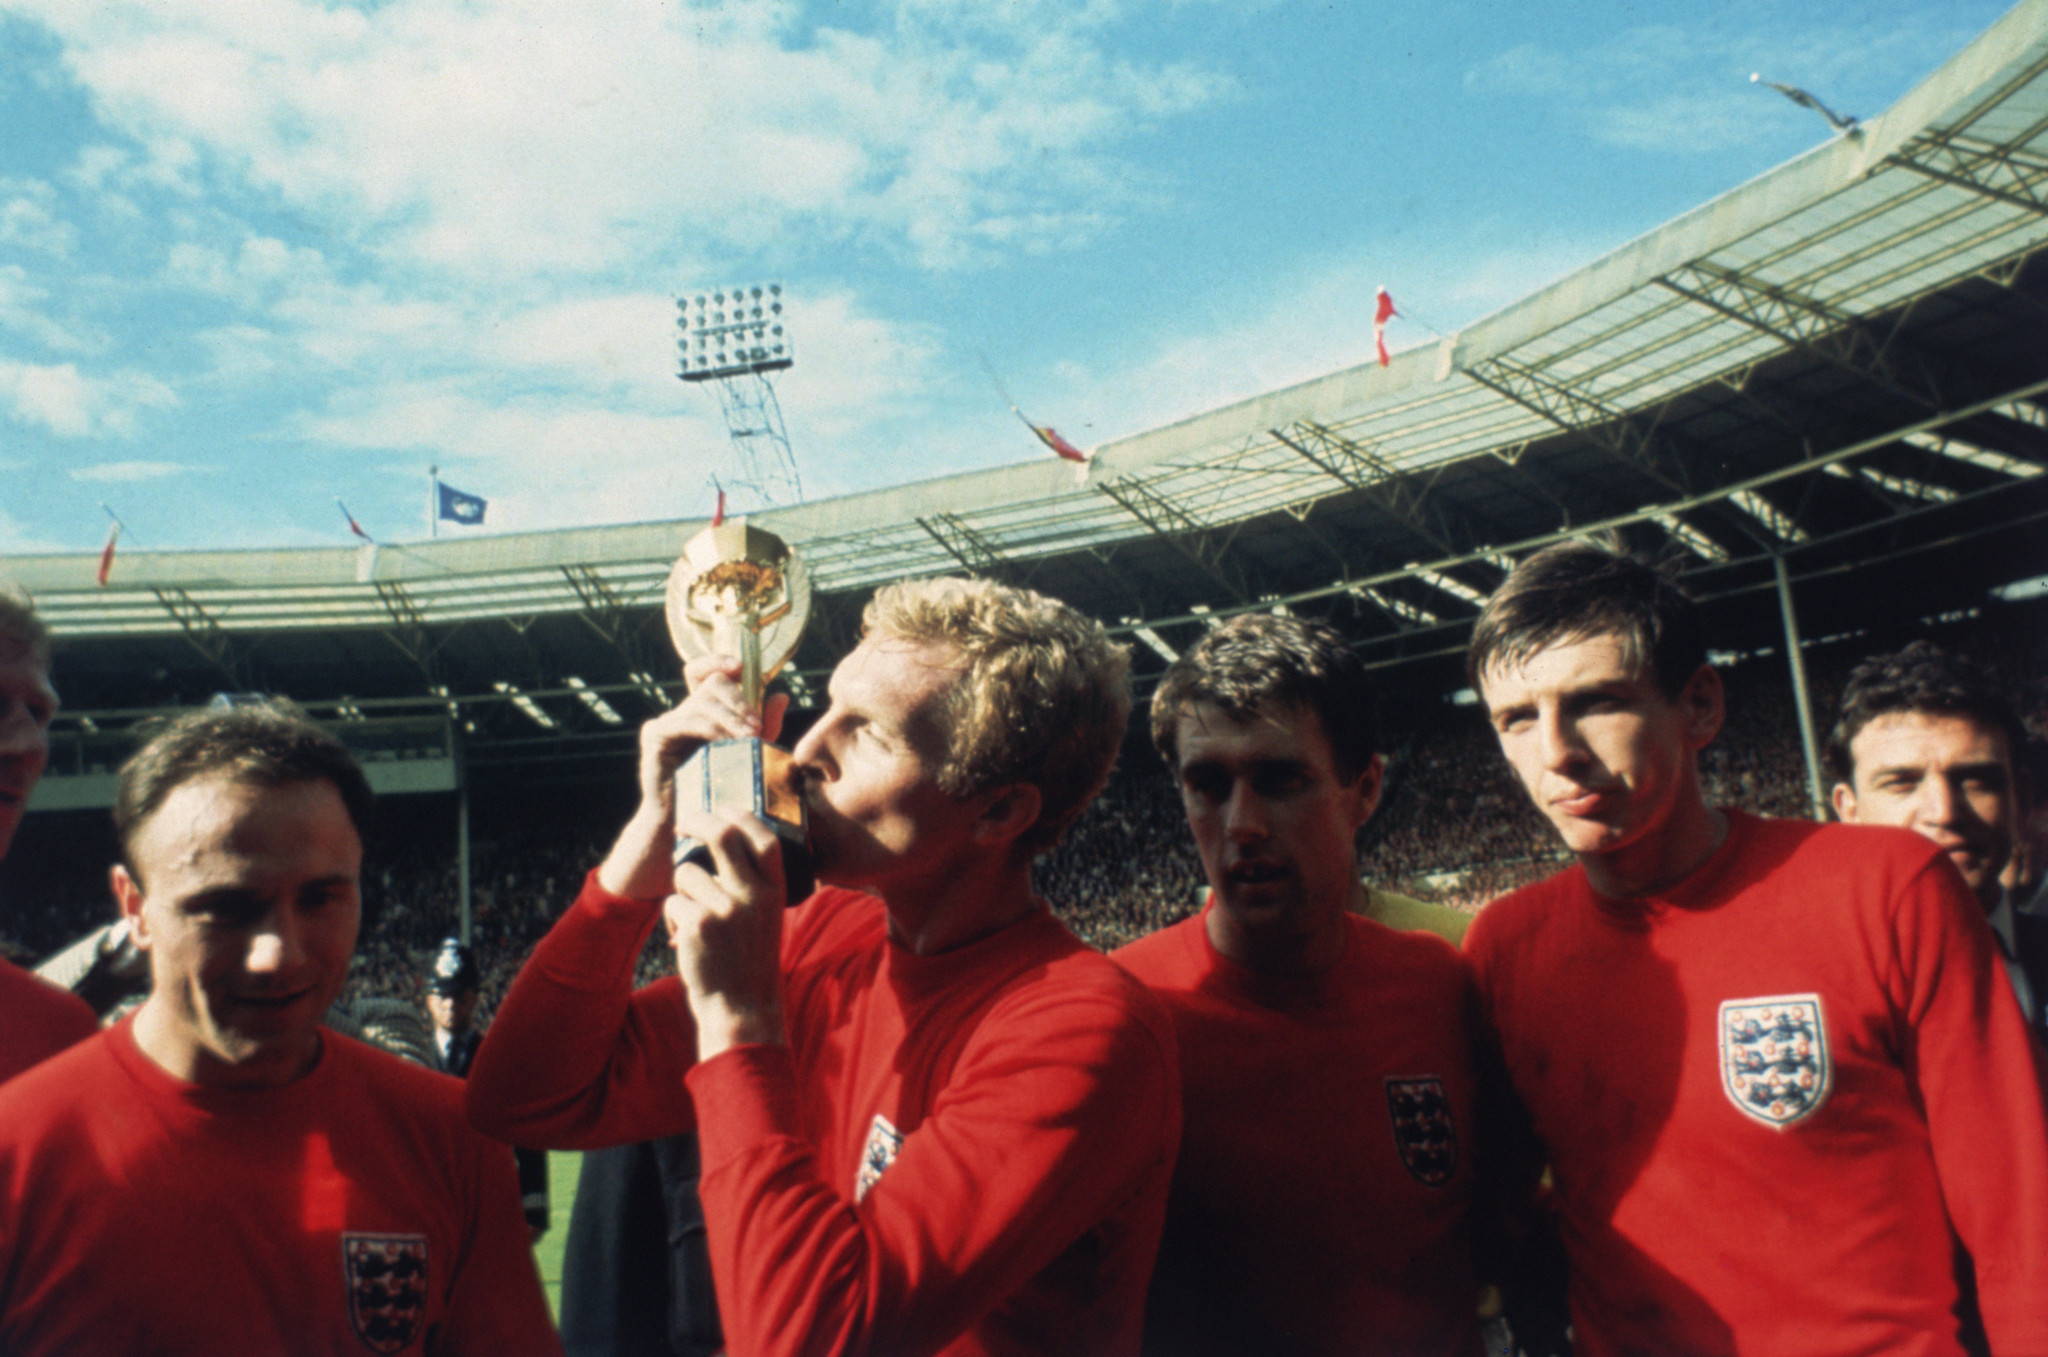 FIFA President Gianni Infantino has described England's 4-2 victory over West Germany in the1966 World Cup final as the greatest moment in the history of Wembley Stadium ©Getty Images